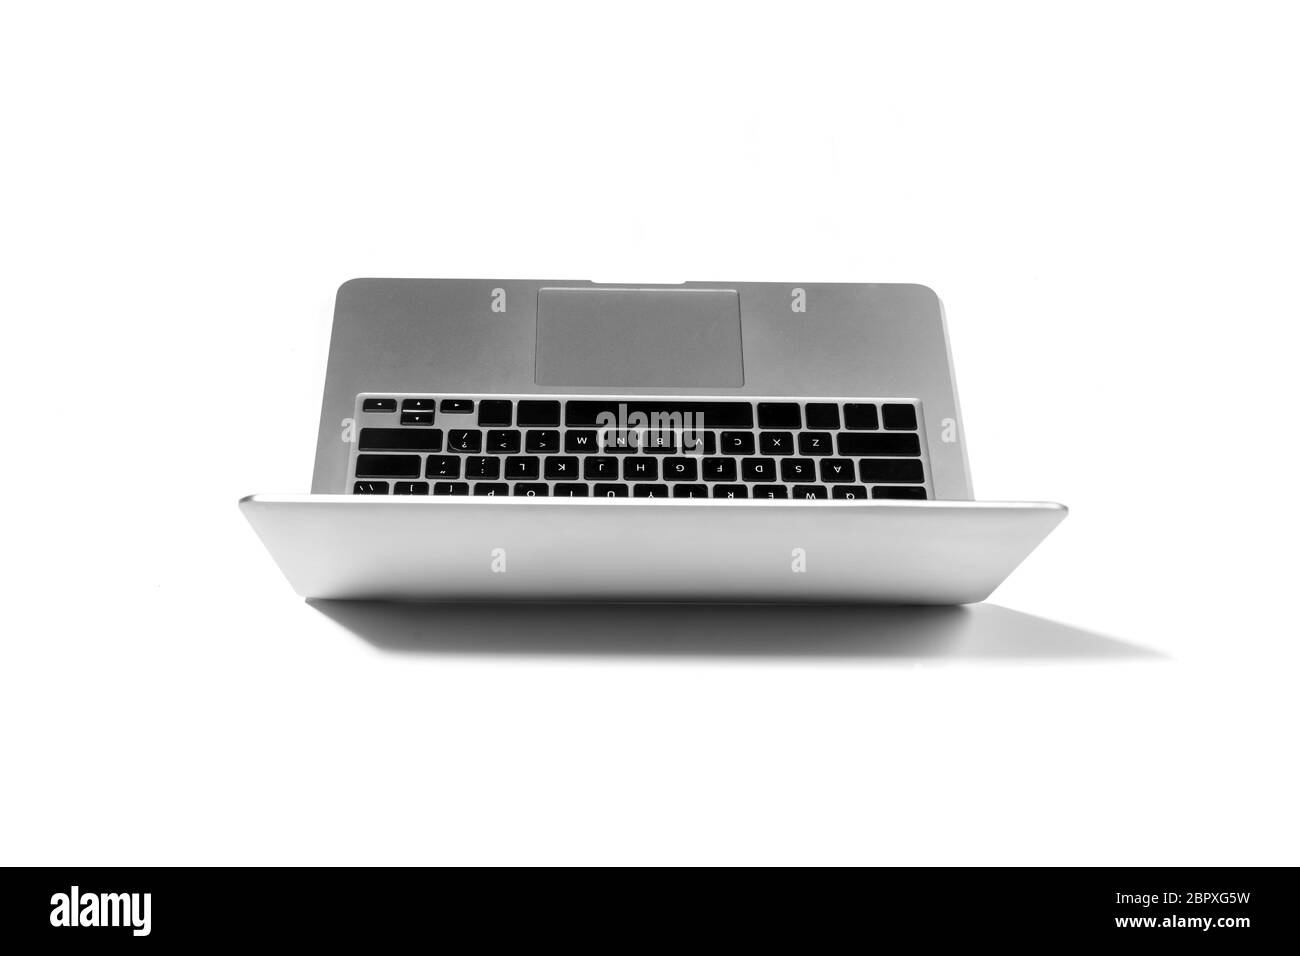 Opened laptop isolated on white studio background with copyspace for ad. Slim modern gadget for office or remote working, freelance, online shopping, watching cinema, typing text, communication. Stock Photo